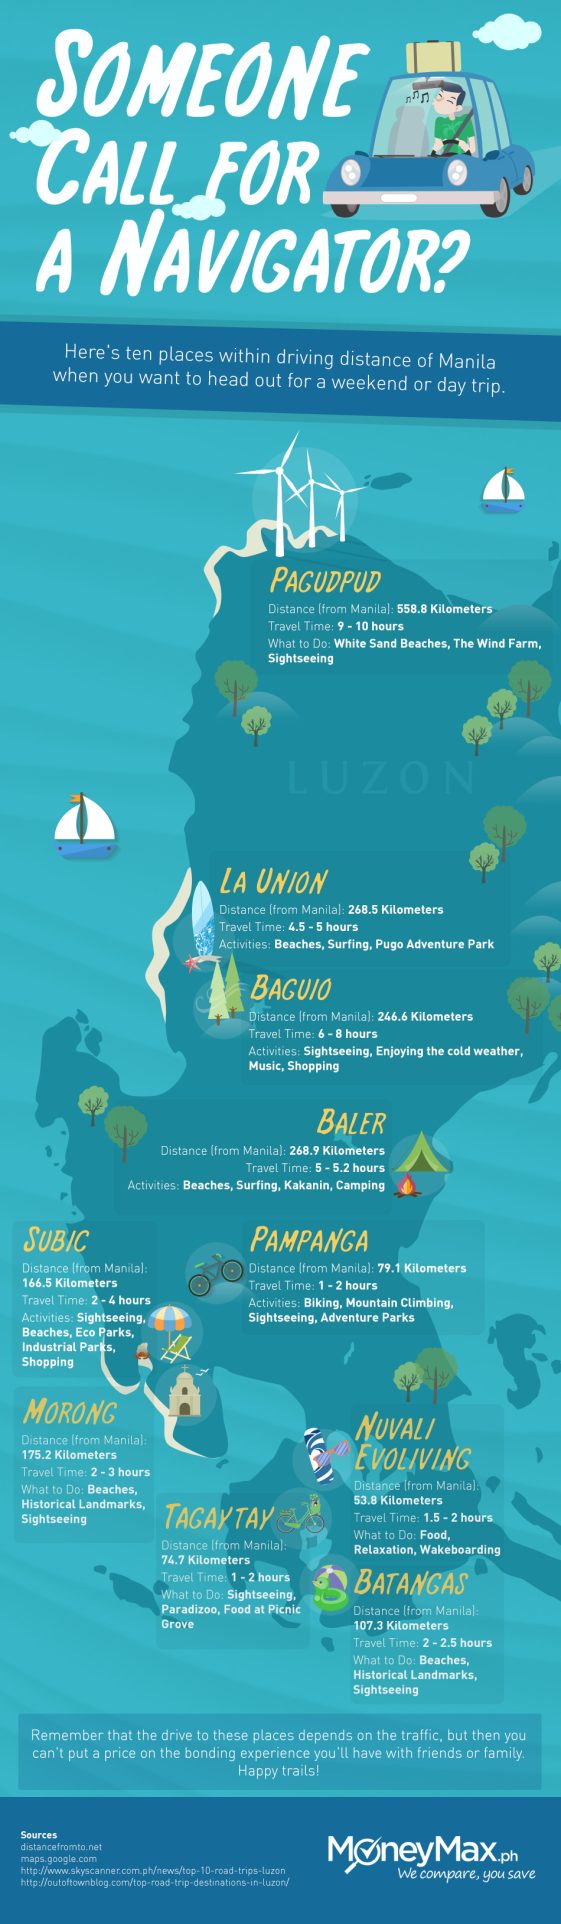 Your Guide to Road Trip Destinations Near Manila